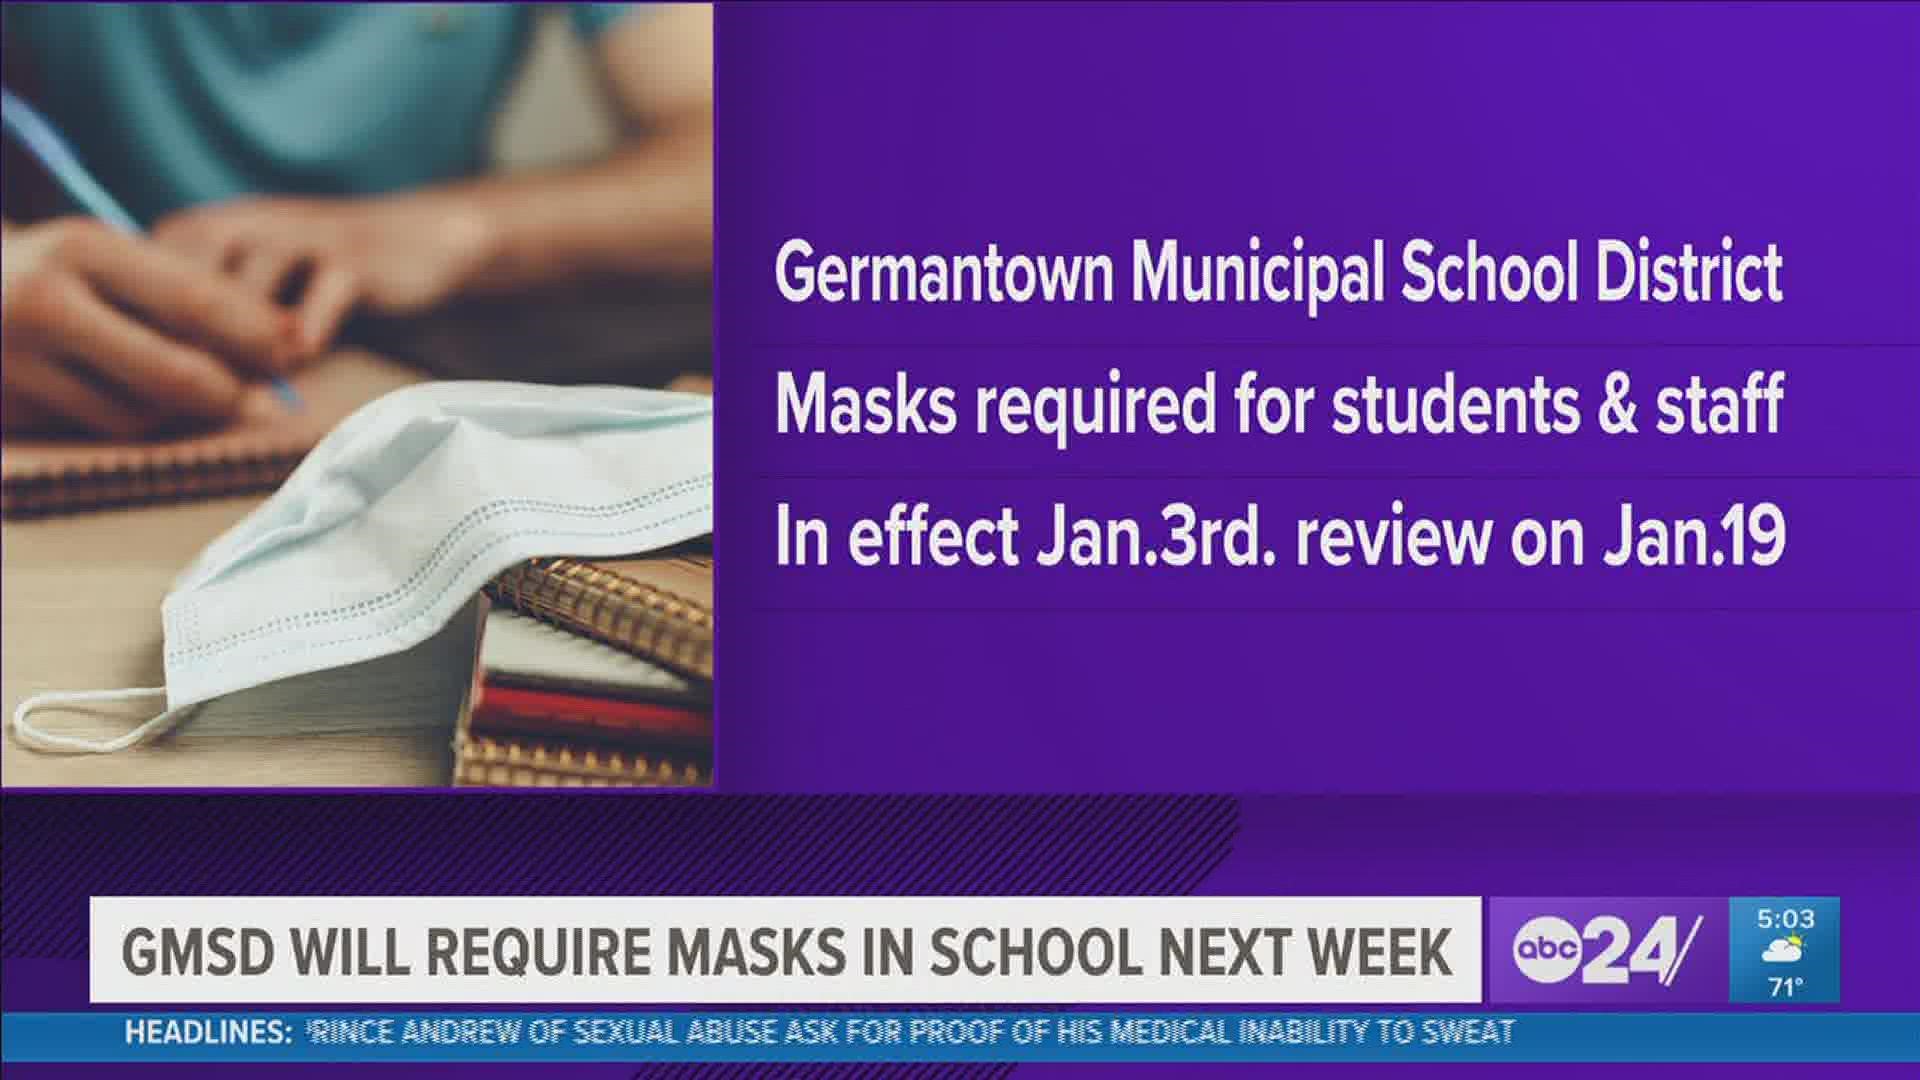 The requirement will be in effect starting on Jan. 3 and is subject to review during the Germantown Board of Education's work session on Jan. 19.